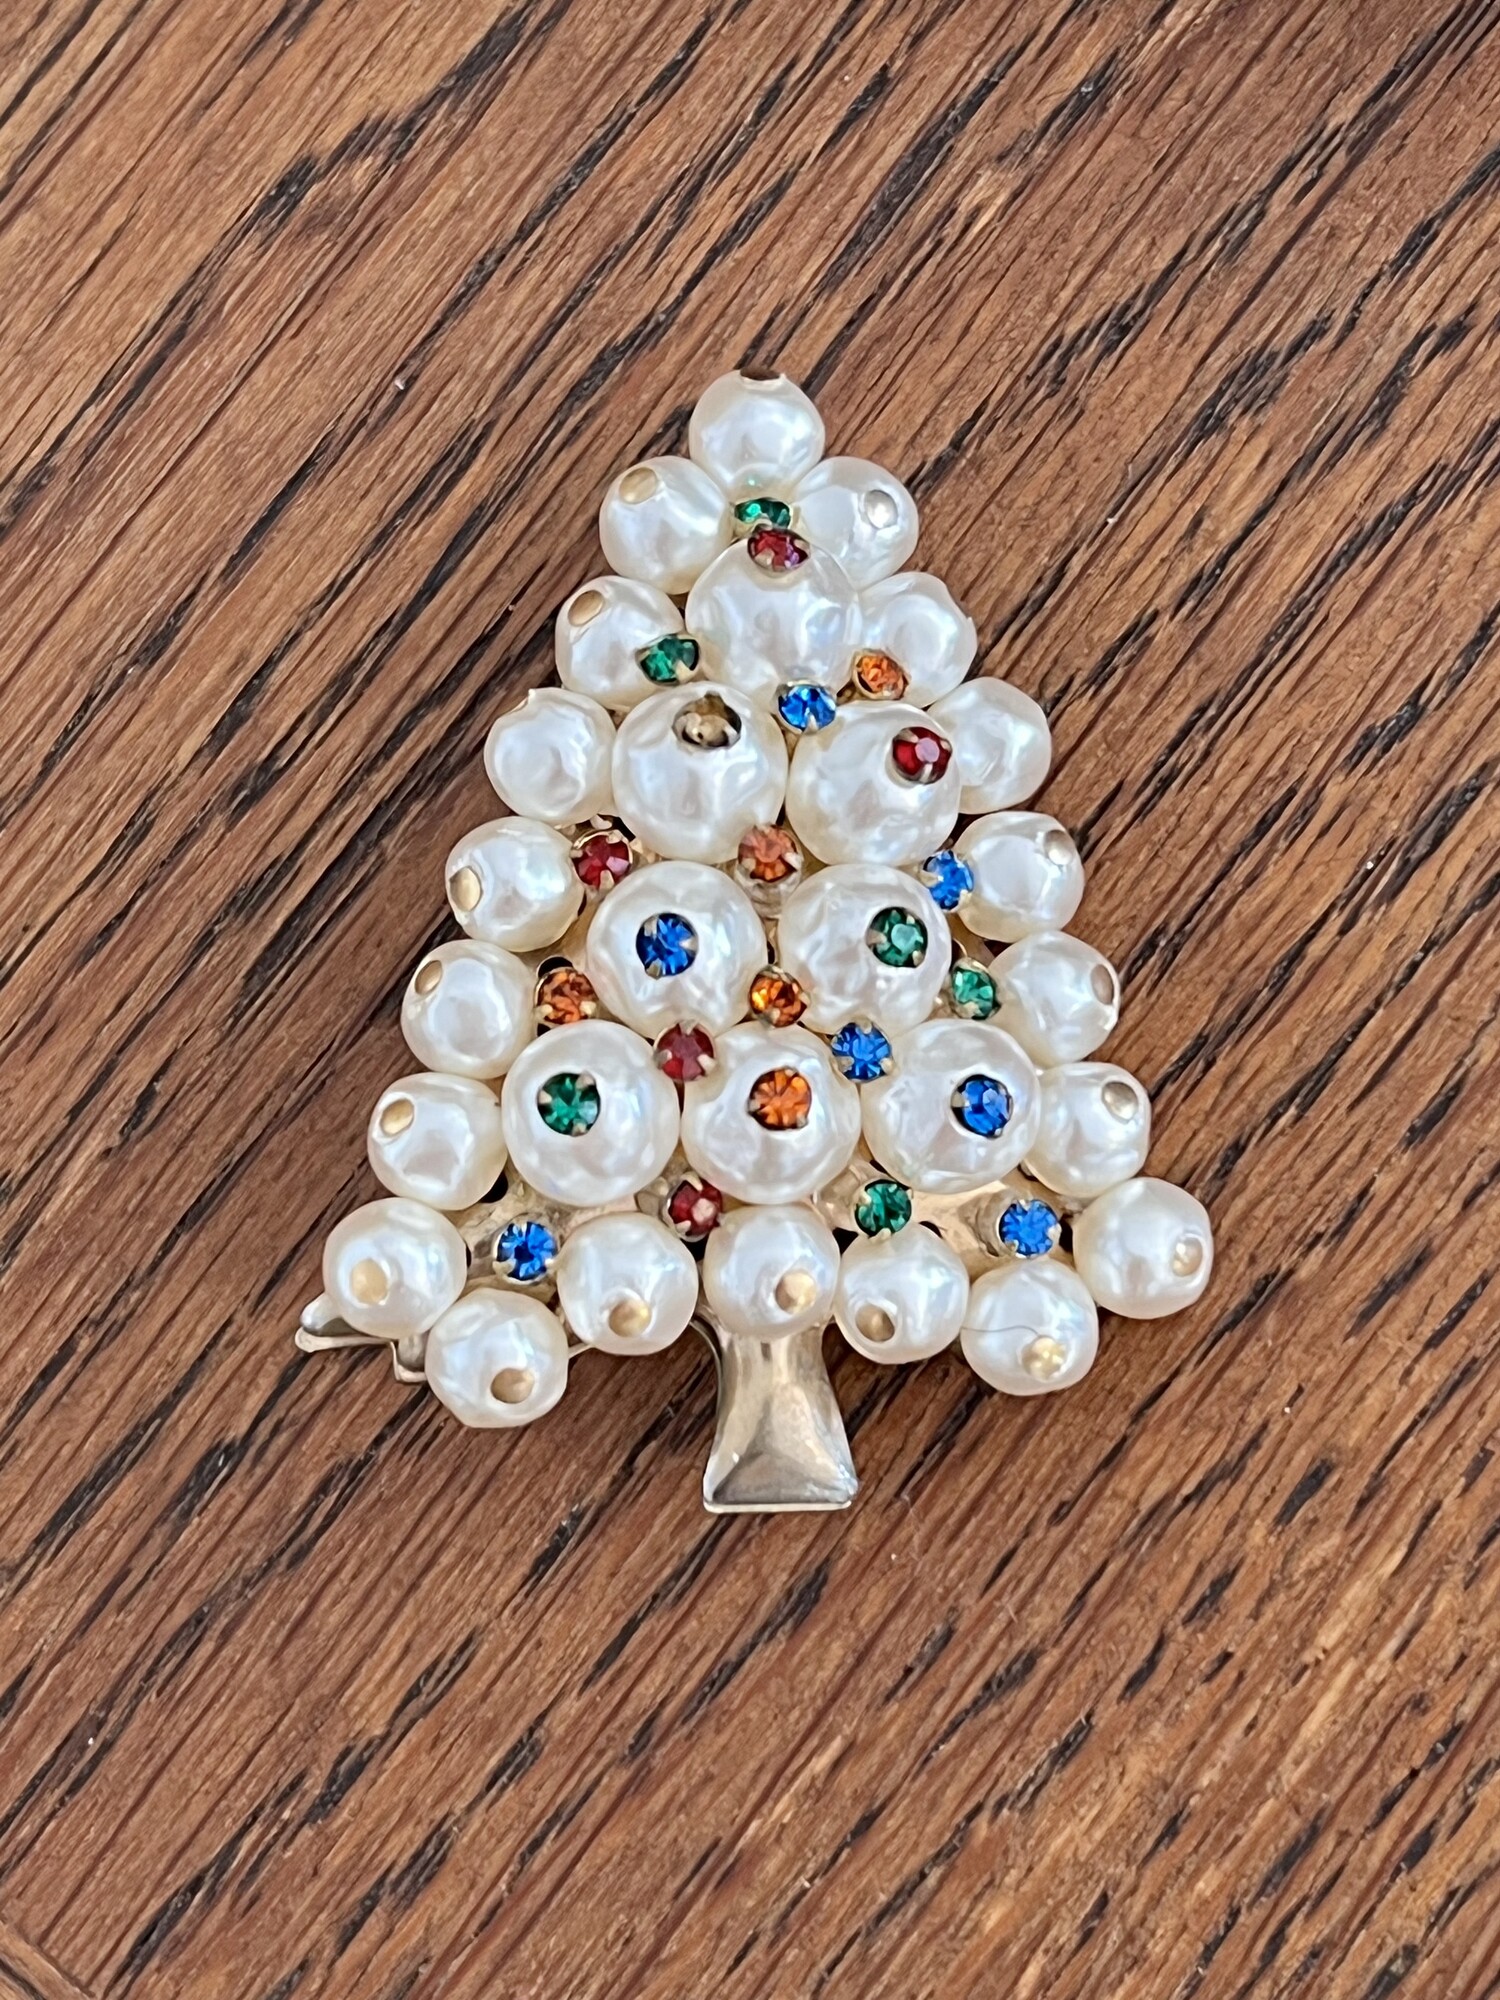 Vintage c. 1960s pearl & rhinestone Christmas Tree Brooch - 1 missing rhinestone which I couldn't see until my 3x zoom photo!  2x1.5